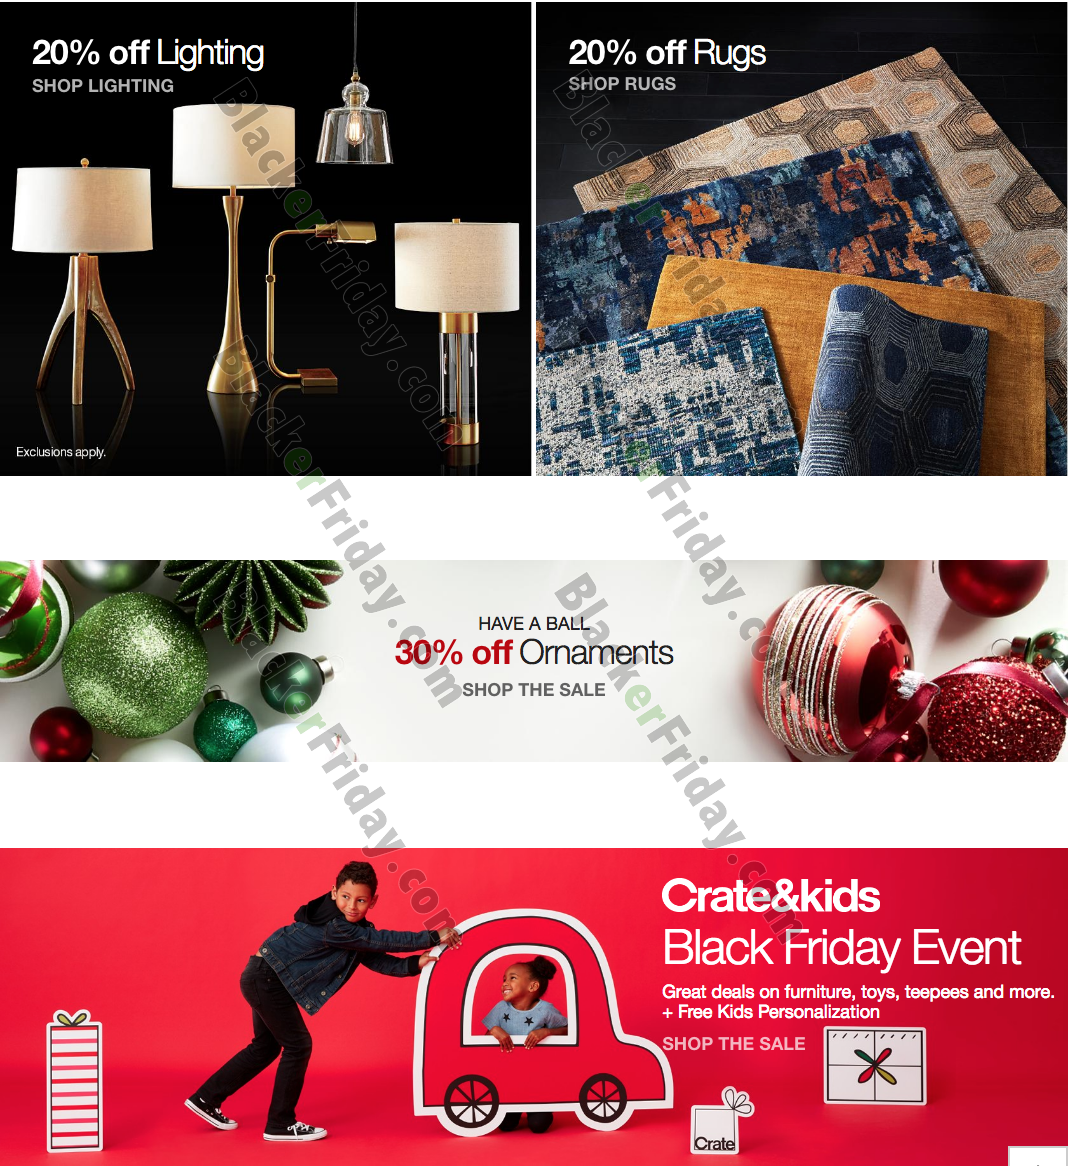 Crate & Barrel Black Friday 2021 Sale - What to Expect - Blacker Friday - Does Ncl Have Black Friday Deals